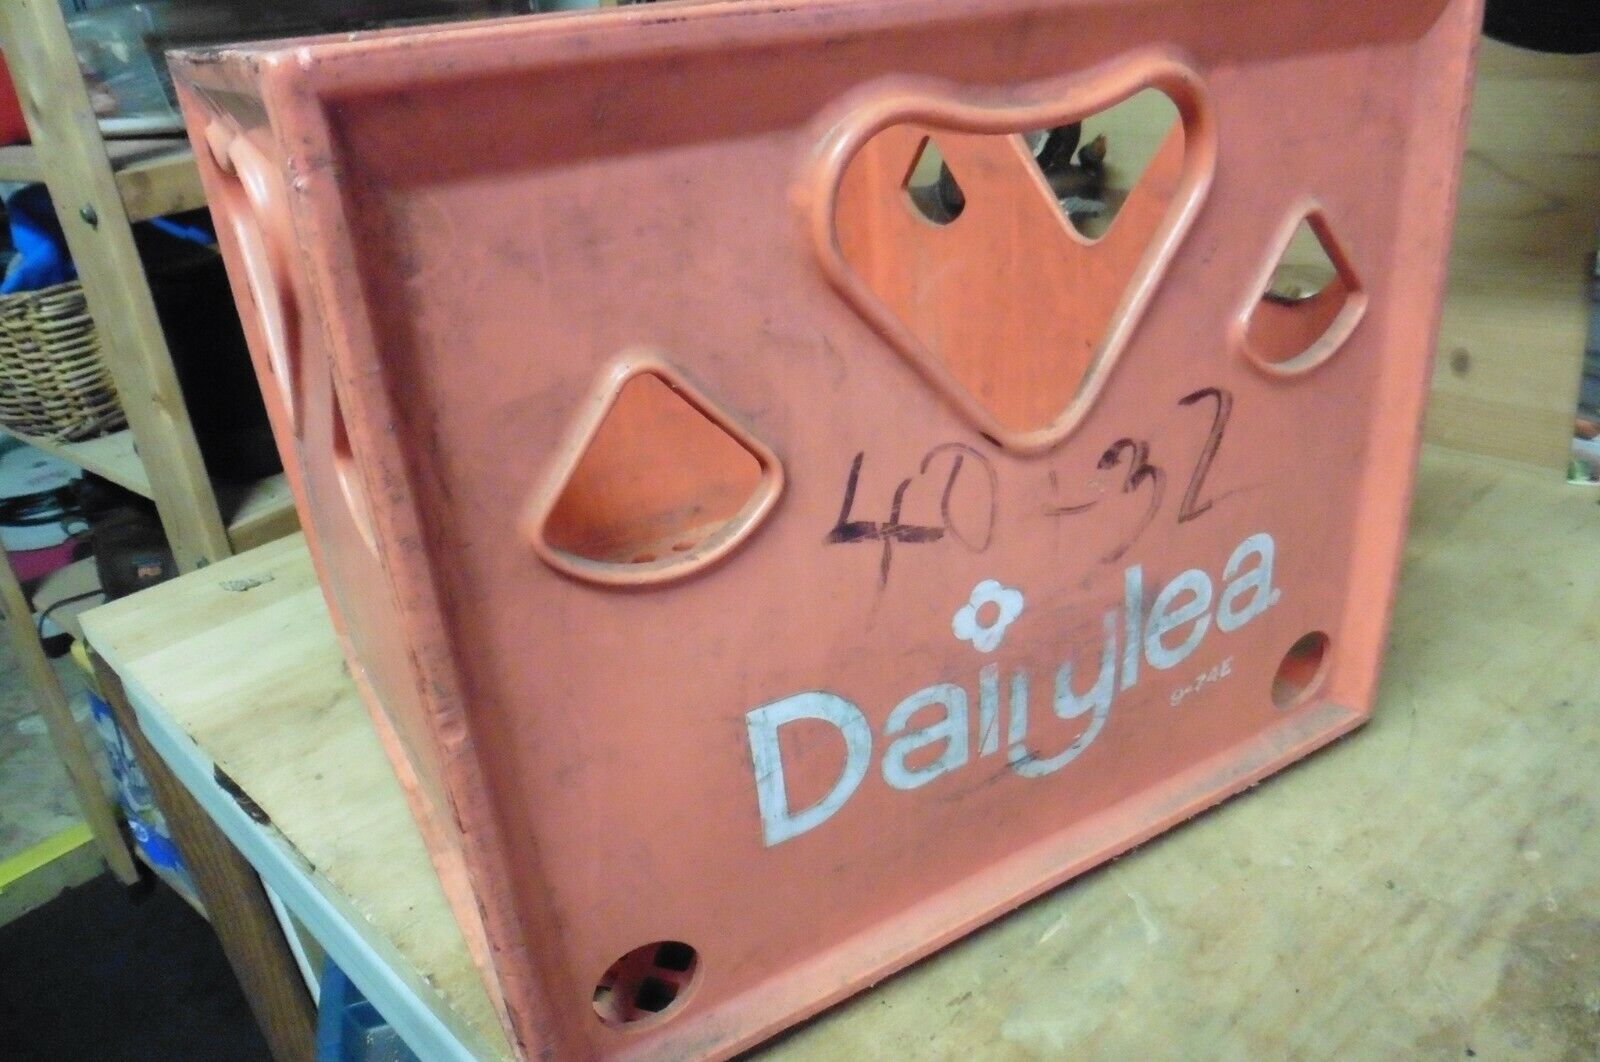 Vtg Milk Crate Dairylea Solid style 1974 Heart shape advertising rare Pink 